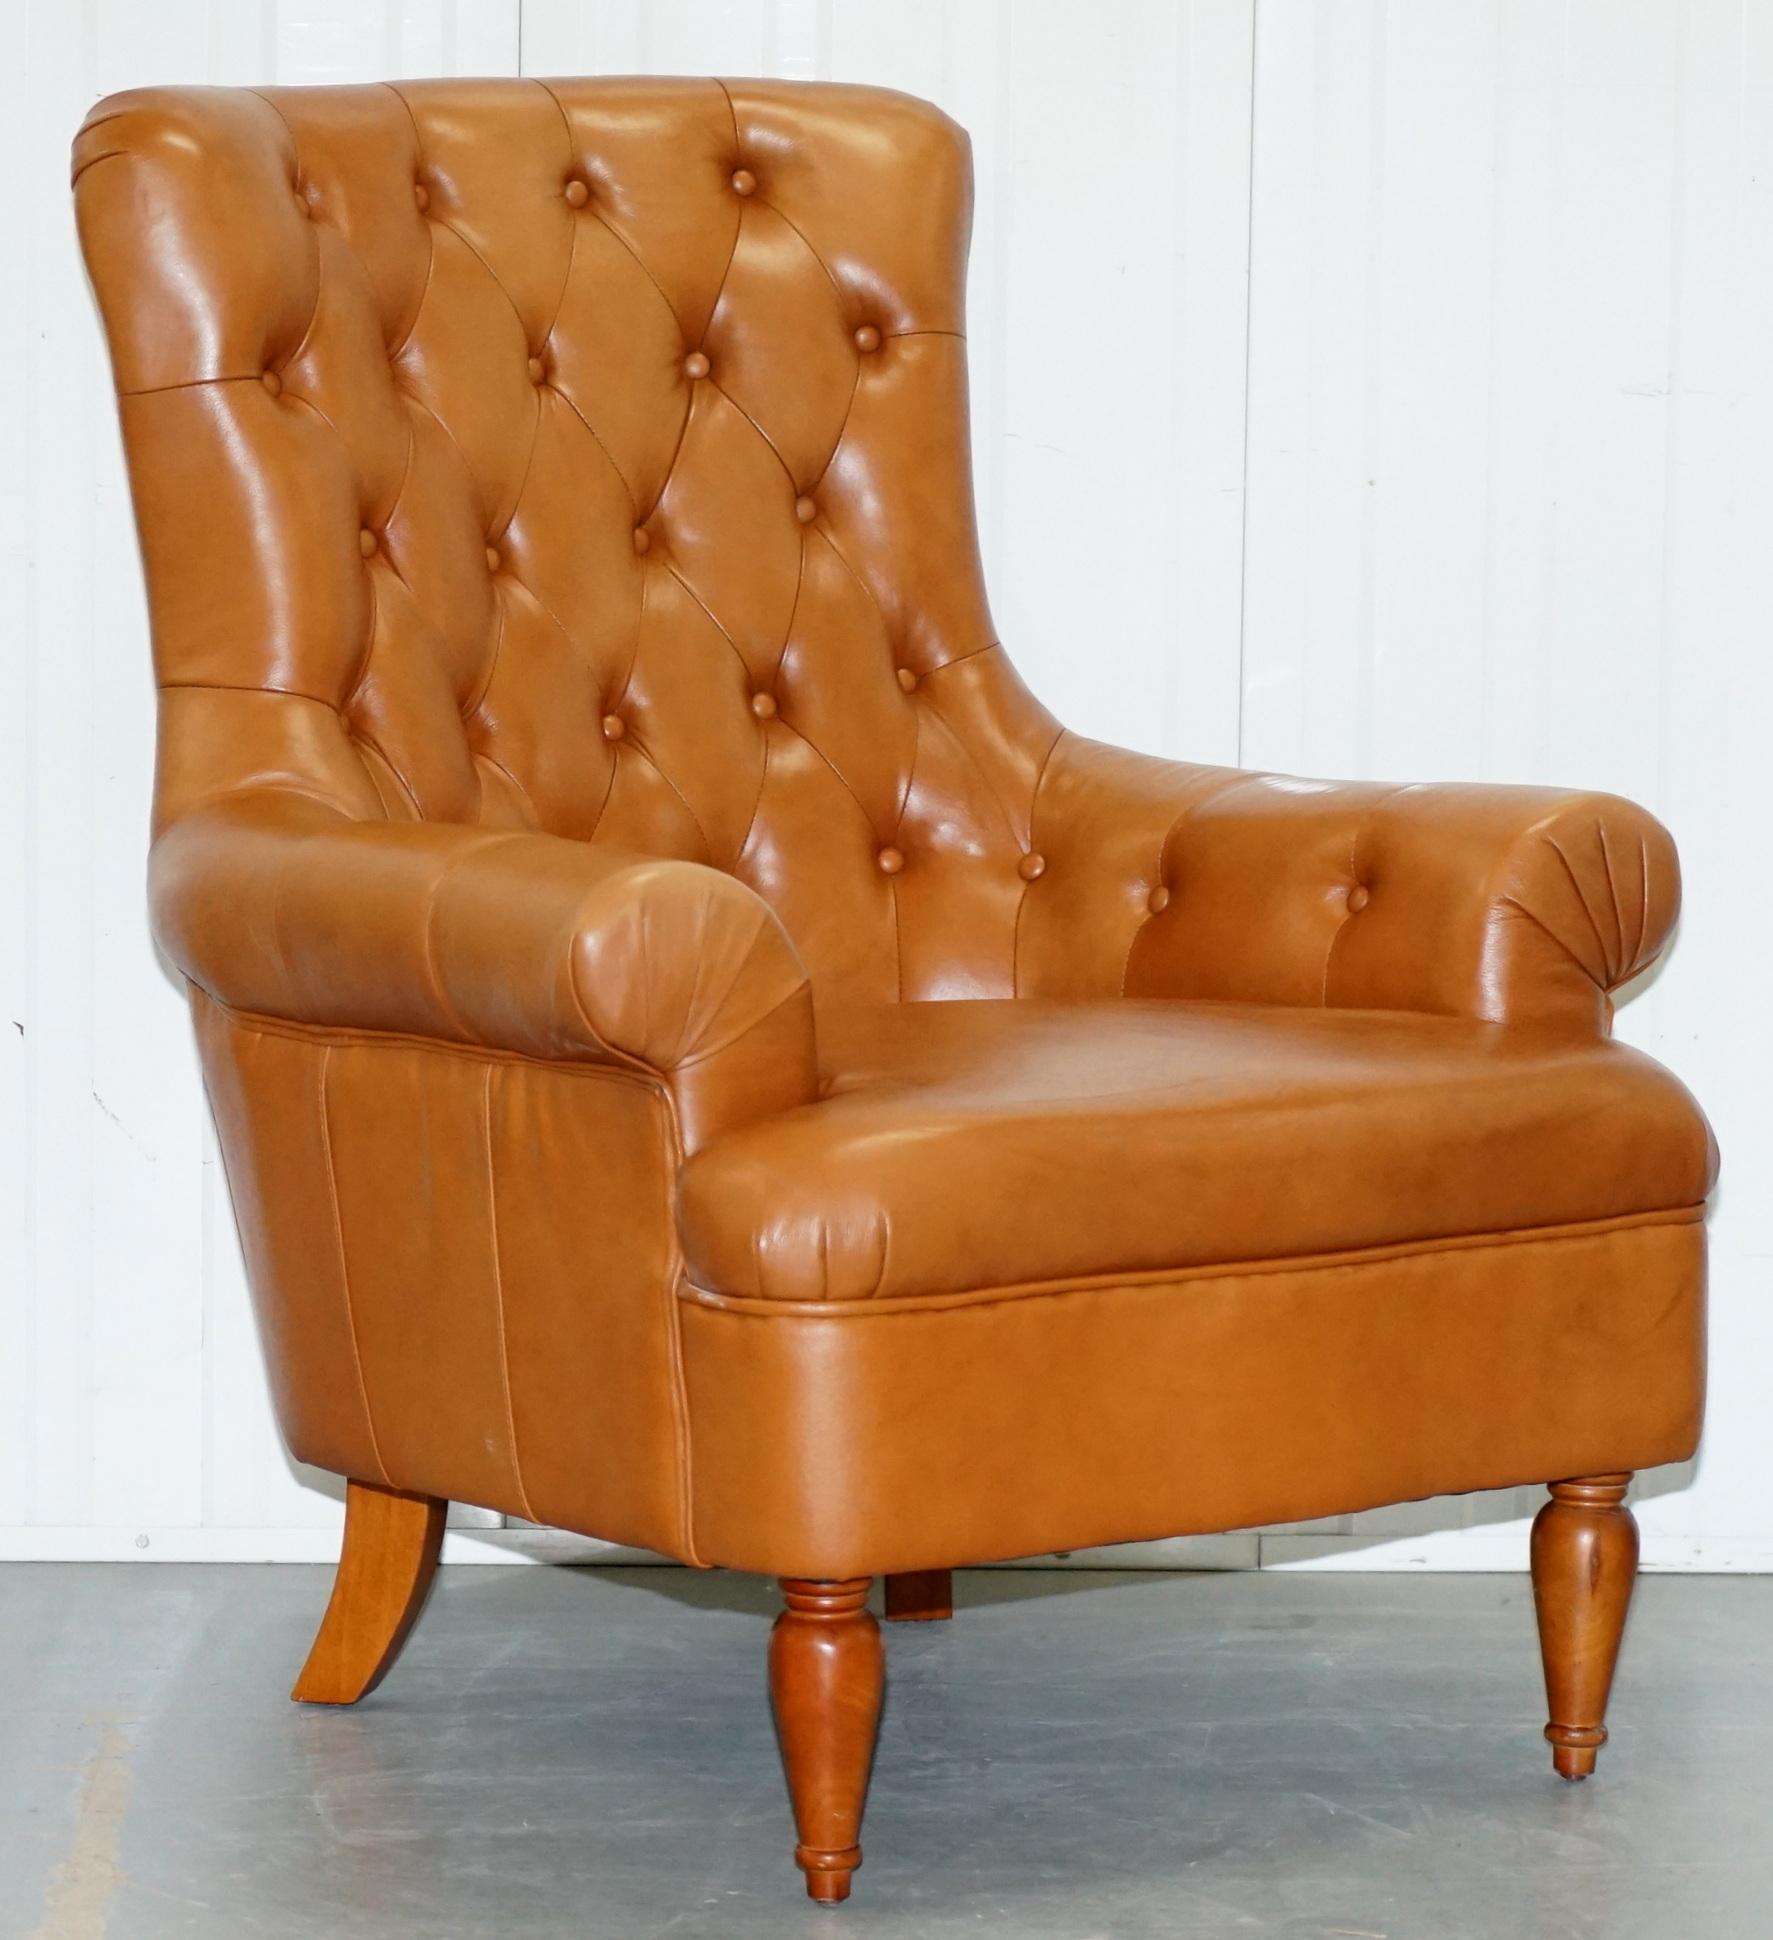 We are delighted to offer for sale this lovely pair of very comfortable high back lounge armchairs in tan brown leather and Chesterfield buttoned

A very good looking and well-made pair, they have been lightly restored to include a deep clean hand